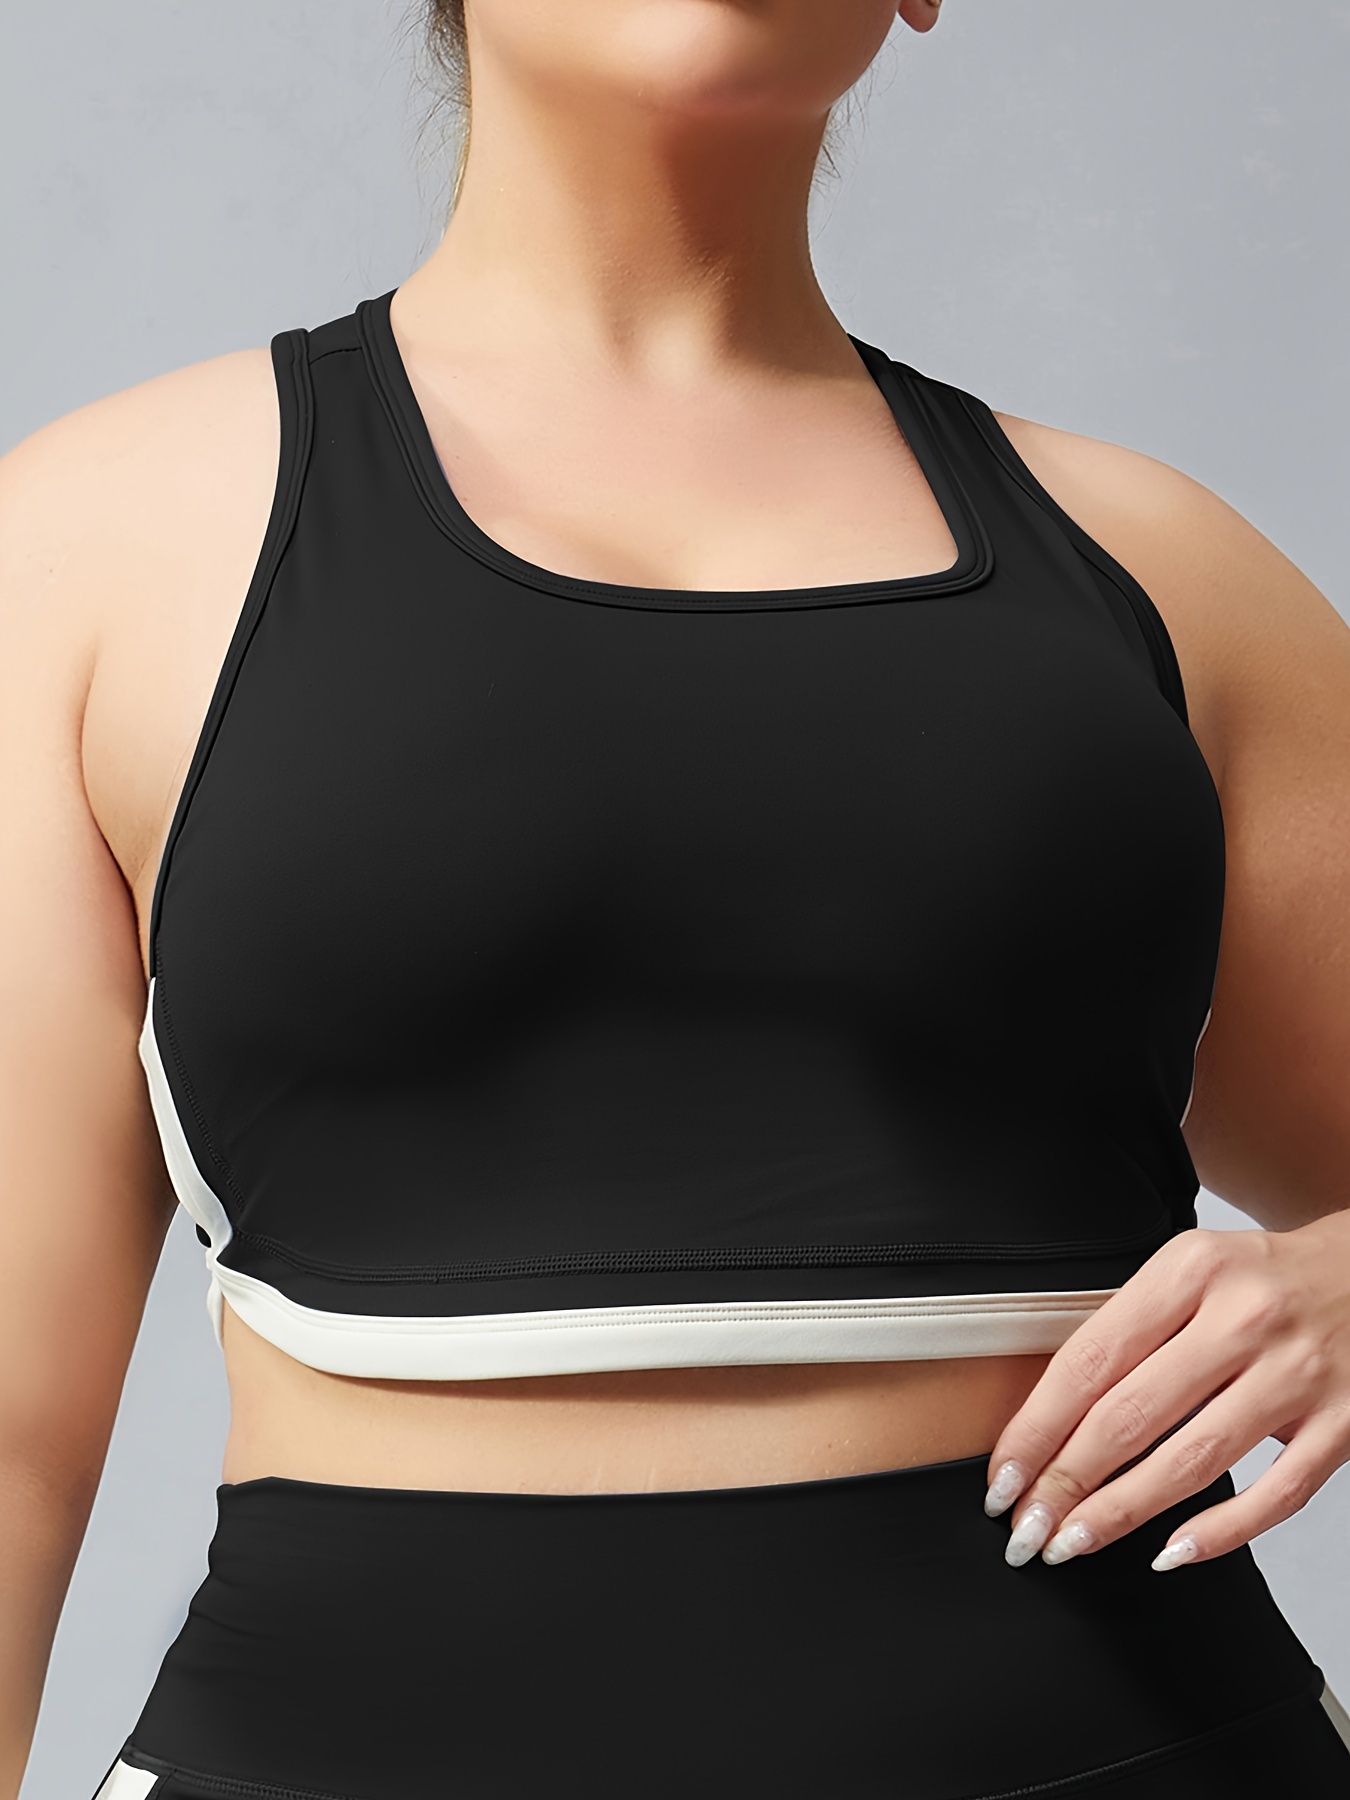 Plus Size Sports Bra Women's Plus Solid Closure Front Padded